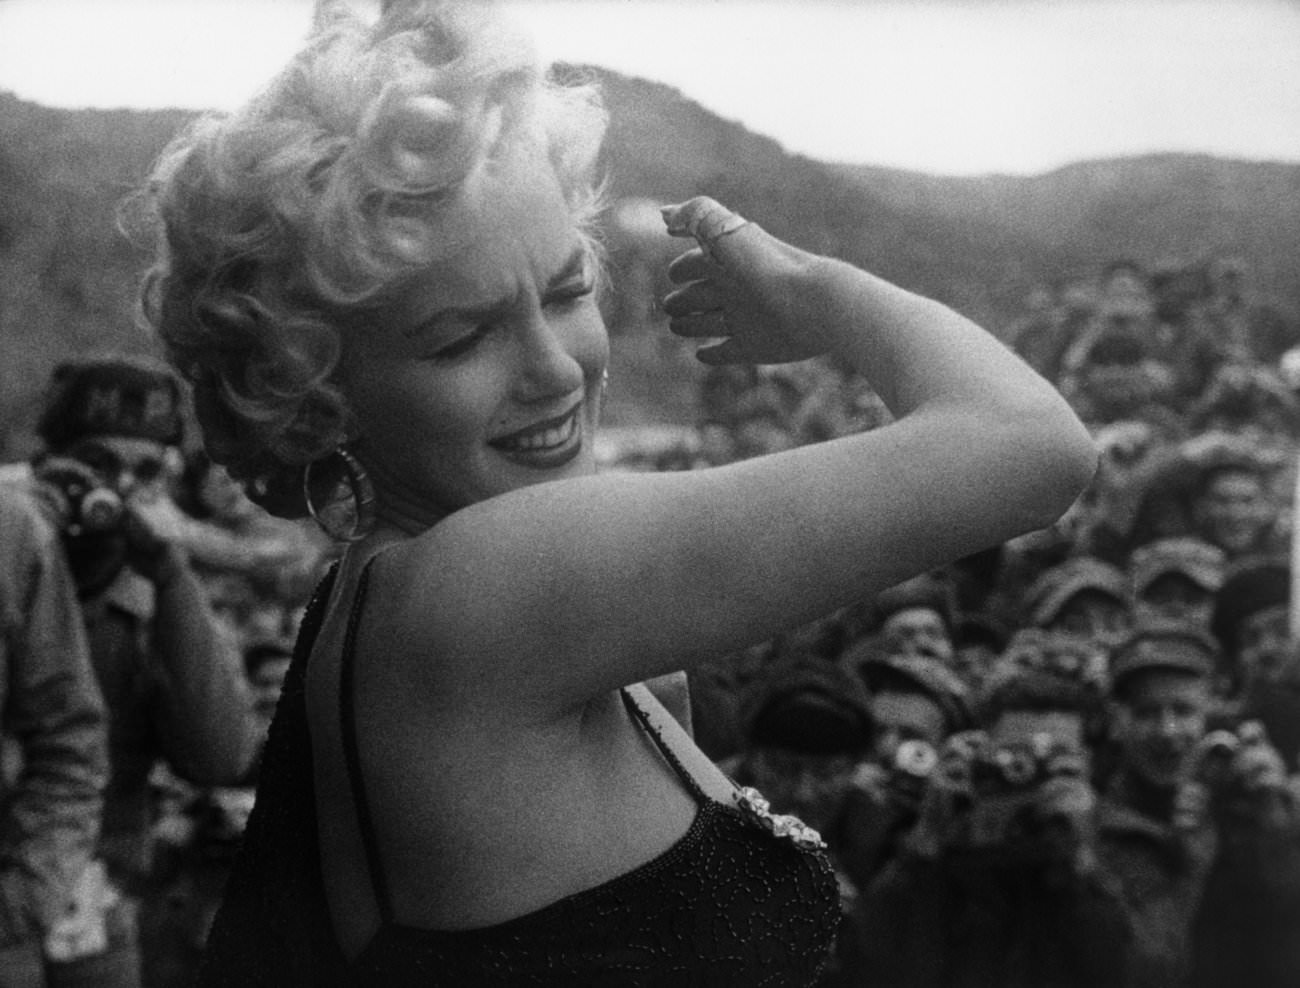 When Marilyn Monroe Visited Korea in 1954 to Entertain the U.S. Troops